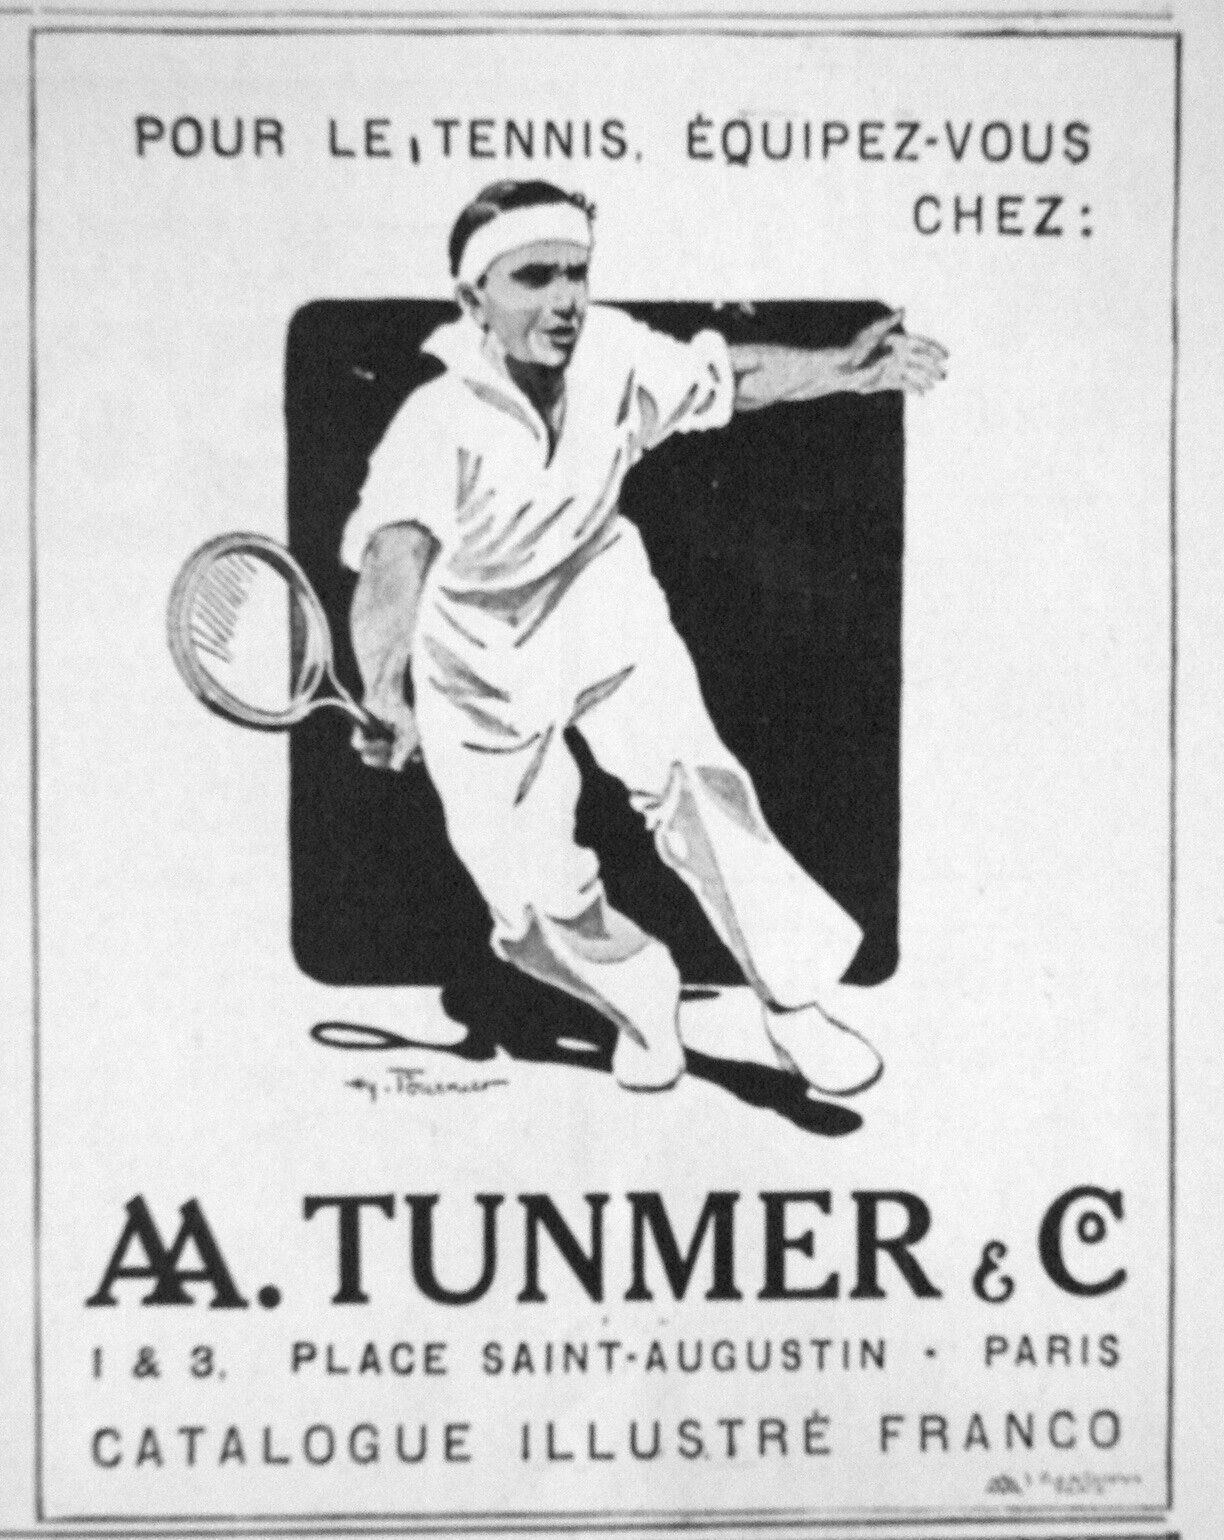 1914 AA.TUNMER & C° PRESS ADVERTISEMENT FOR TENNIS RACKETS & SPORTS